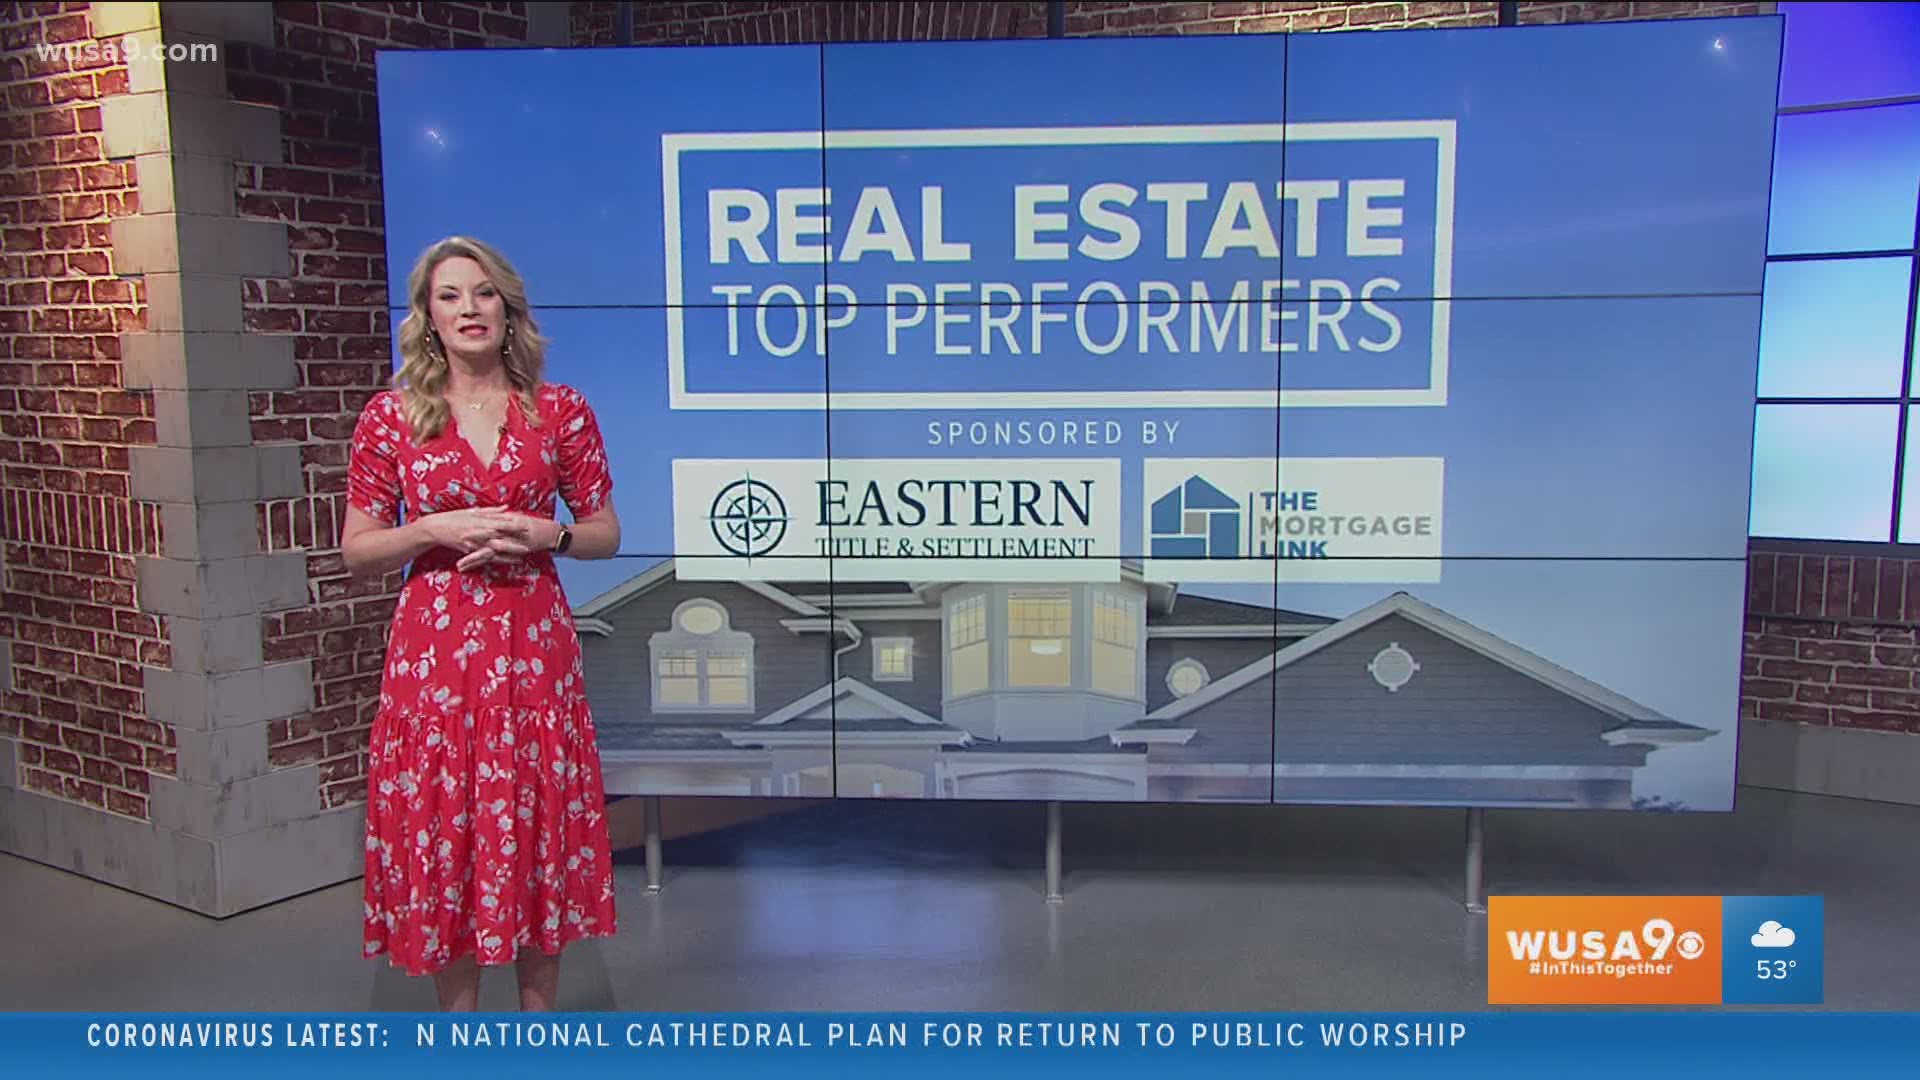 We hear from two real estate experts about their experience in this spring market during the COVID-19 pandemic. Sponsored by the Real Estate Top Performers